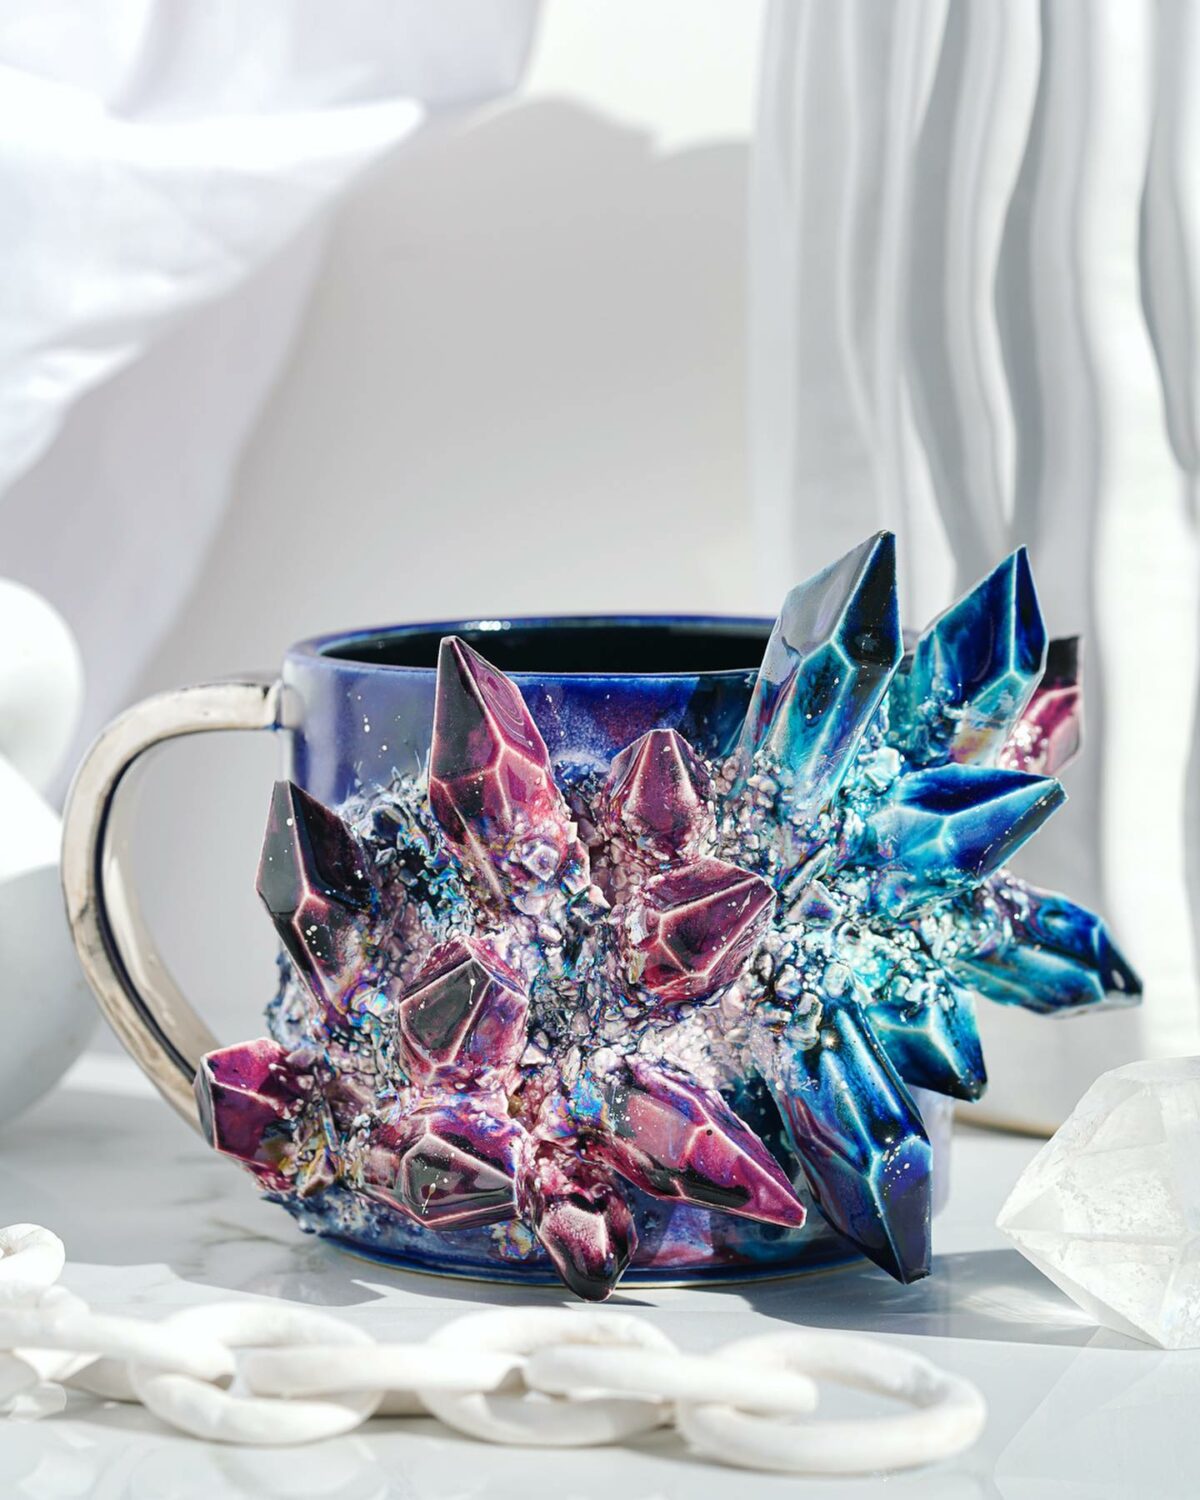 Lush Ceramic Vessels Decorated With Colorful Crystals By Collin Lynch 9